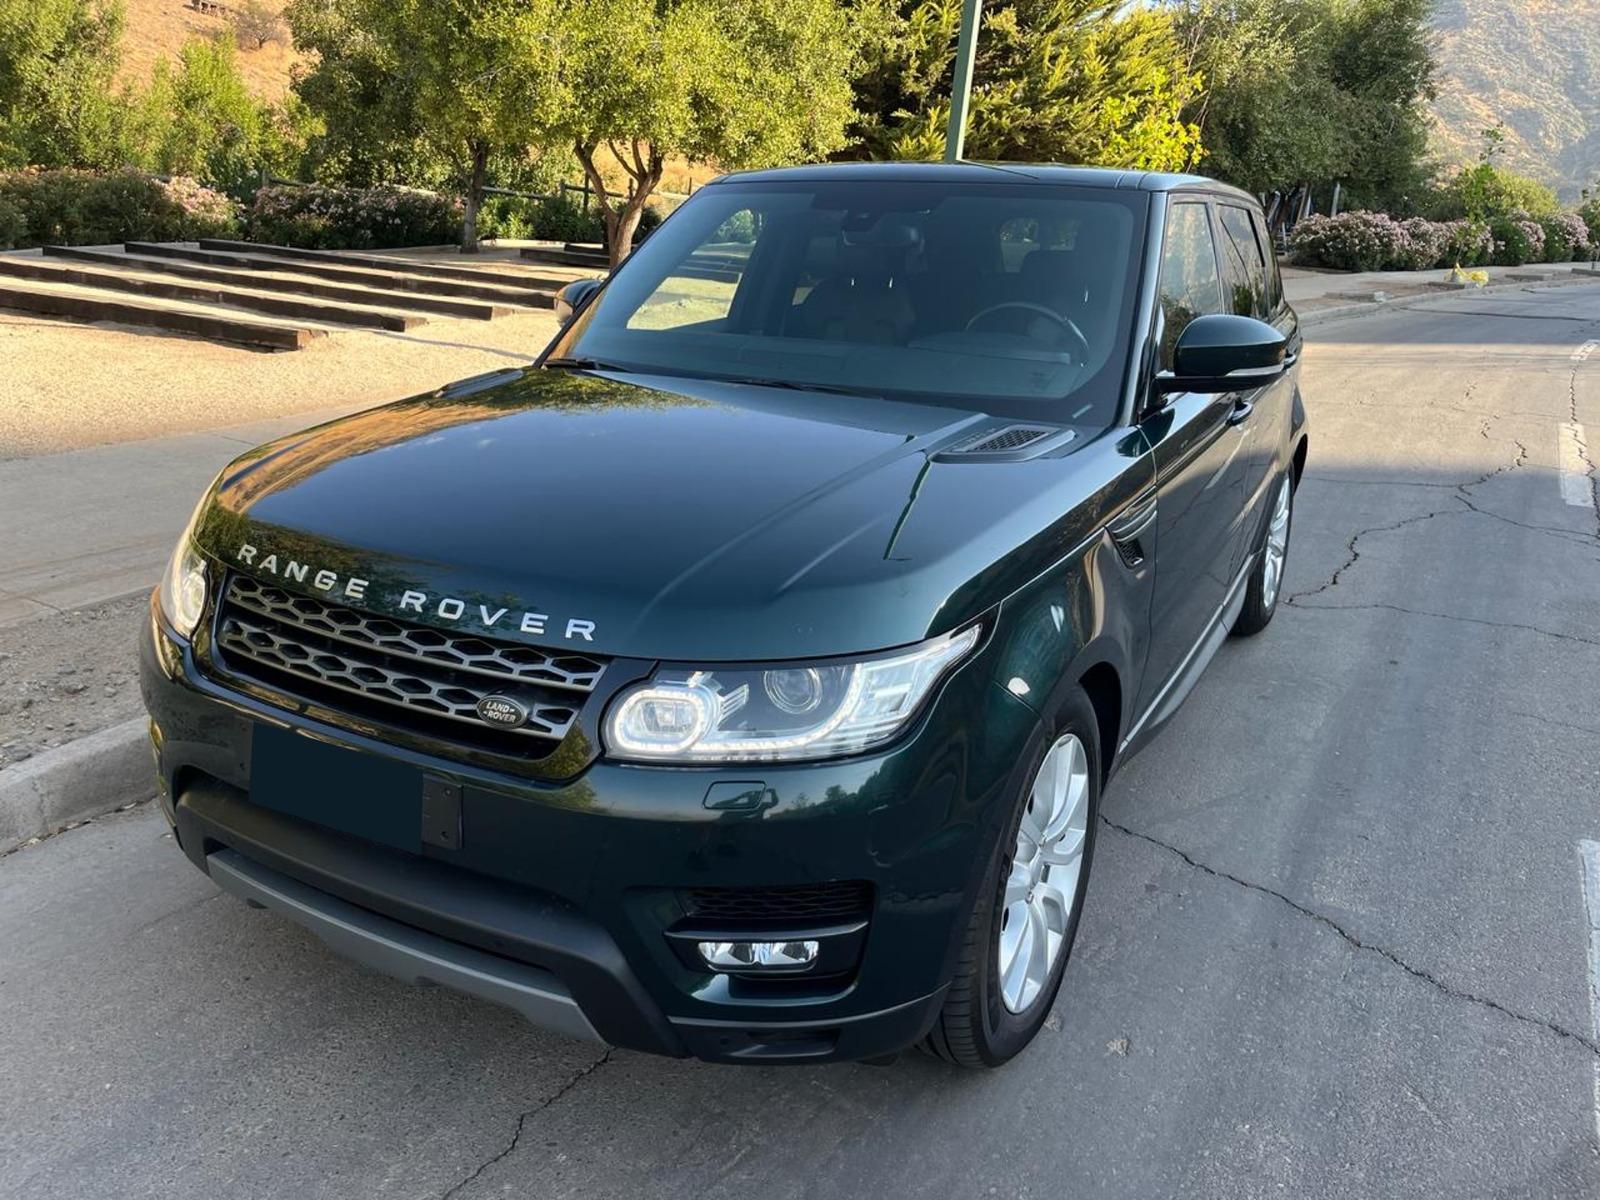 LAND ROVER RANGE ROVER Range Rover Sport 3.0 V6 Supercharged SE 2017 Suv Impecable - FULL MOTOR